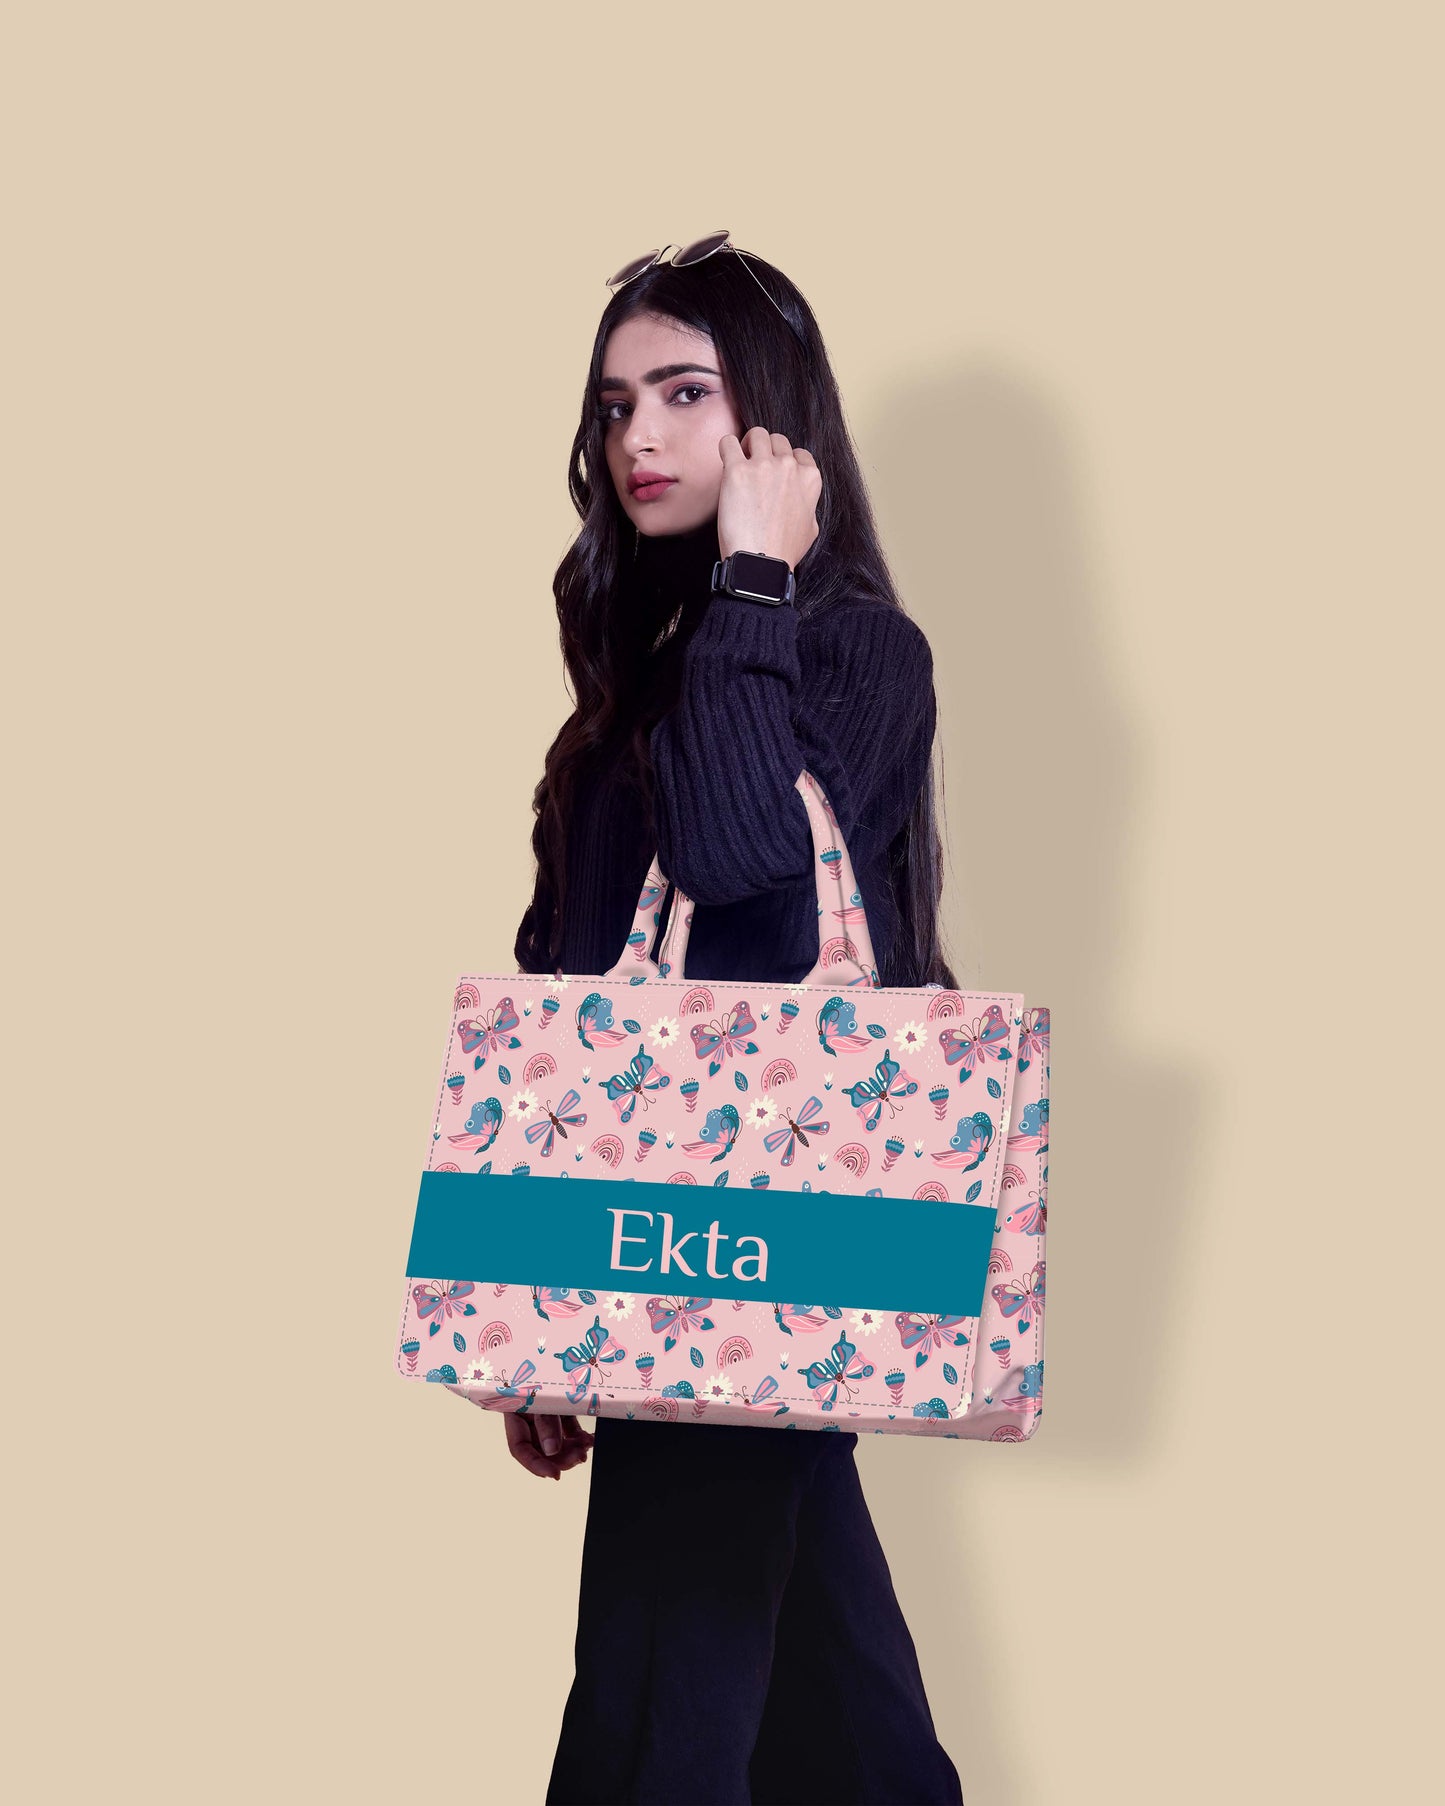 Customized Tote Bag Designed with Elegant Blues And Pink Butterflies